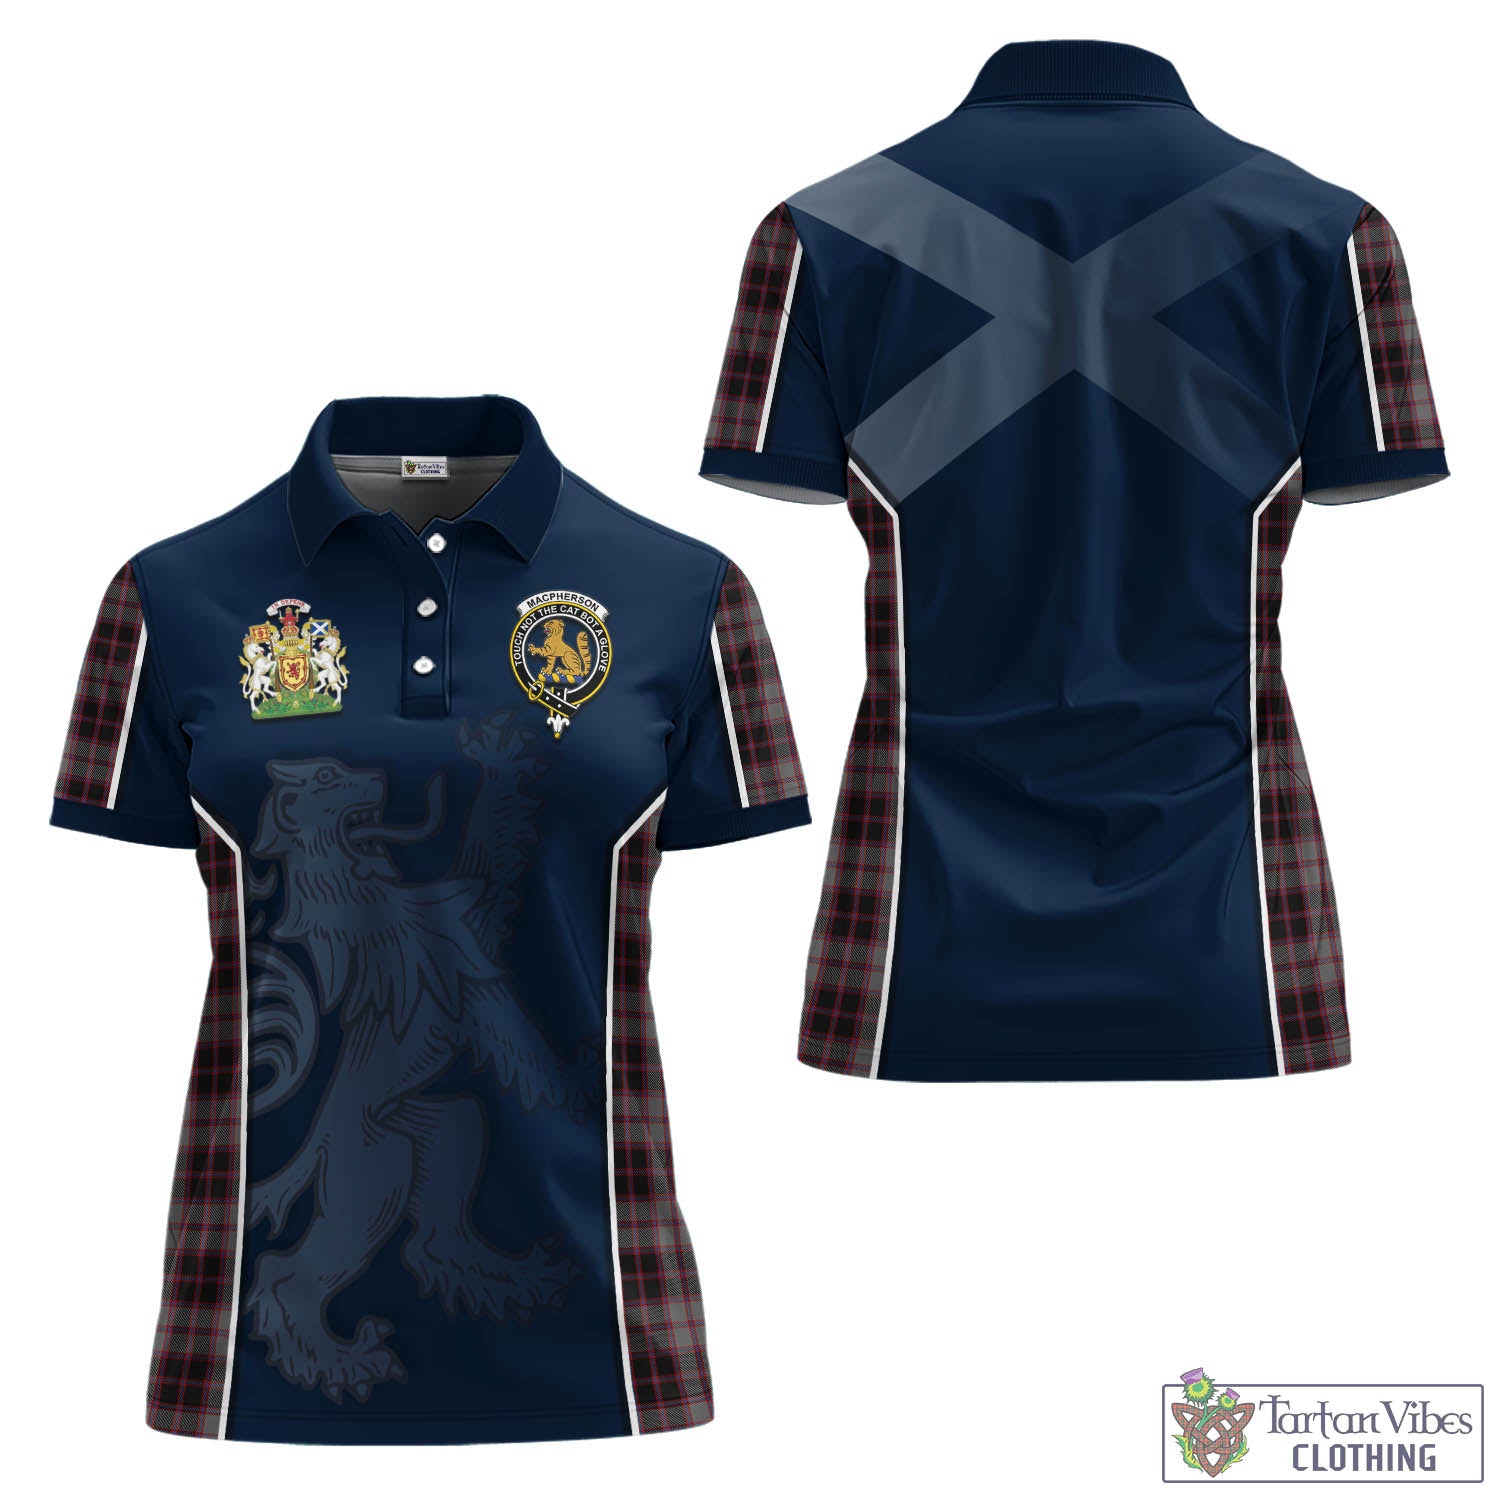 Tartan Vibes Clothing MacPherson Hunting Tartan Women's Polo Shirt with Family Crest and Lion Rampant Vibes Sport Style